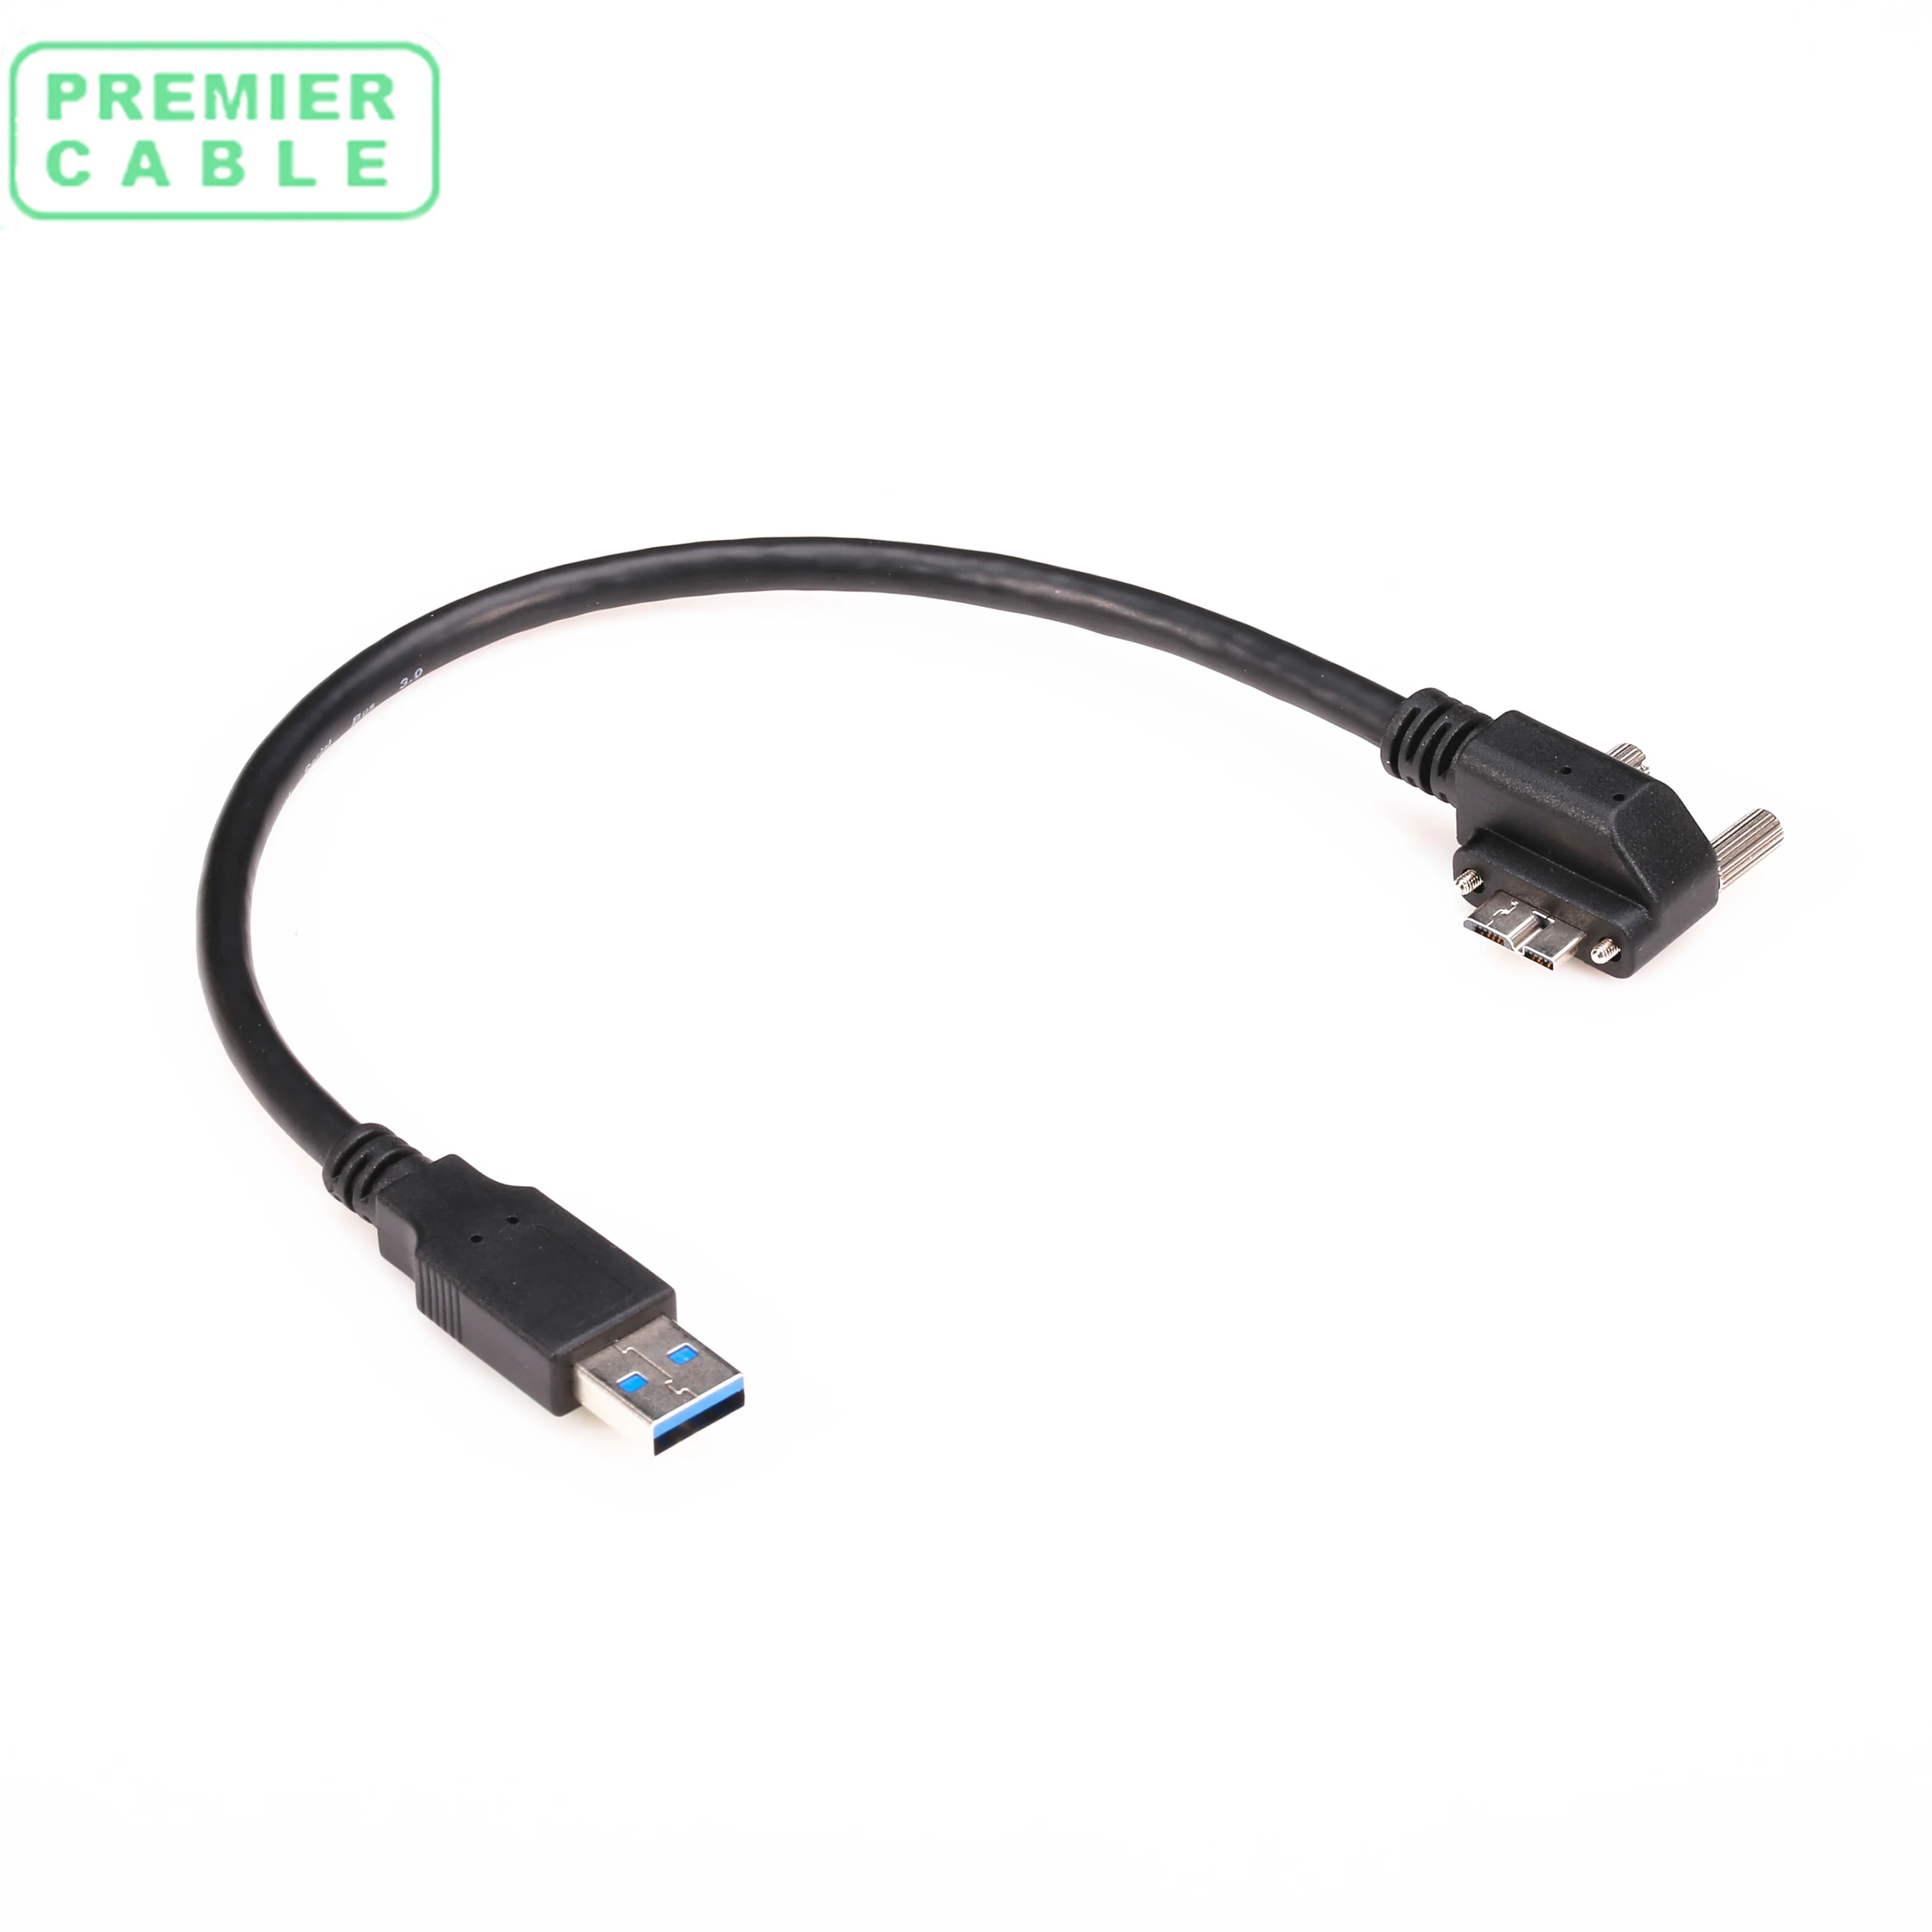 Multiplication scandal highway Usb 3.0 Mate To Micro-b Micro Usb 3.0 W/ Usb Charging Connection Cable -  Black (60cm / 15cm) - Buy Usb 3.0 Mate To Micro-b Micro Usb 3.0 W/ Usb  Charging Connection